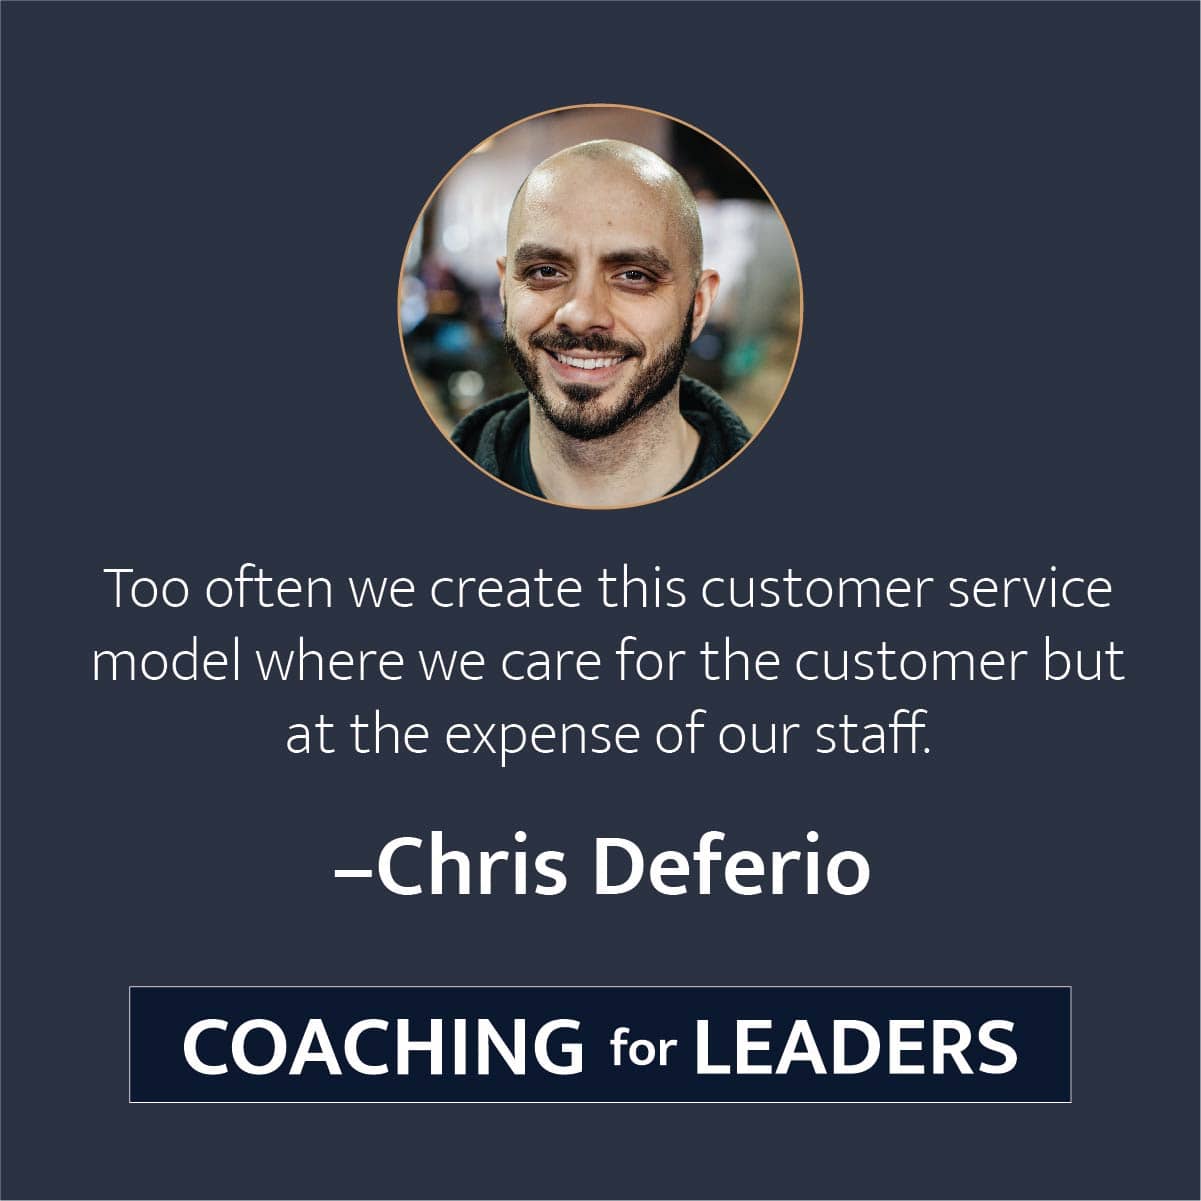 Too often we create this customer service model where we care for the customer but at the expense of our staff.